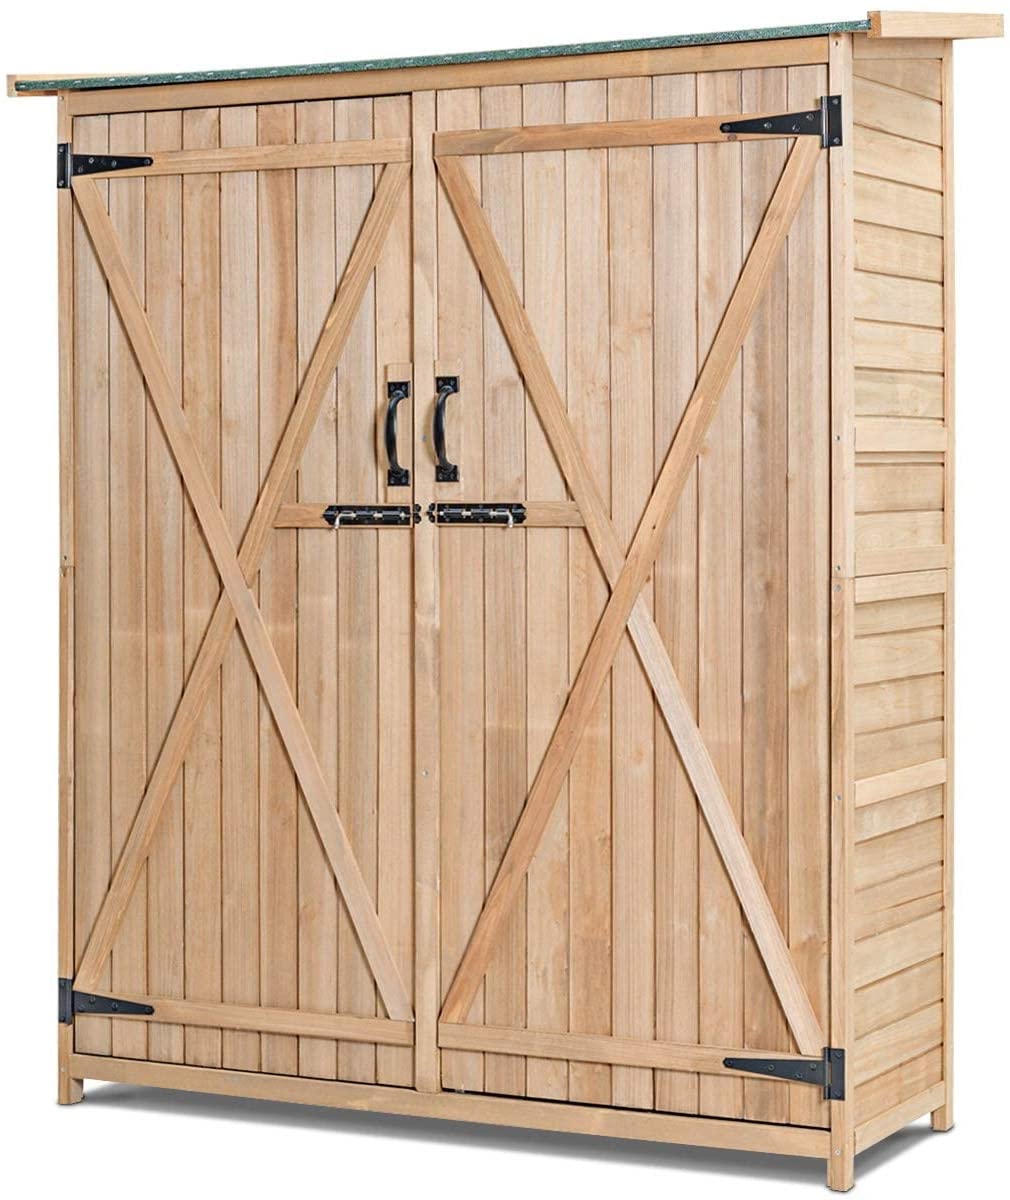 GRAFFY Outdoor Storage Shed, Wooden Garden Tools Cabinet with 2 Lockable Doors and Handles, Organizer Cabinet with Tilted Asphalt Roof, for Outside